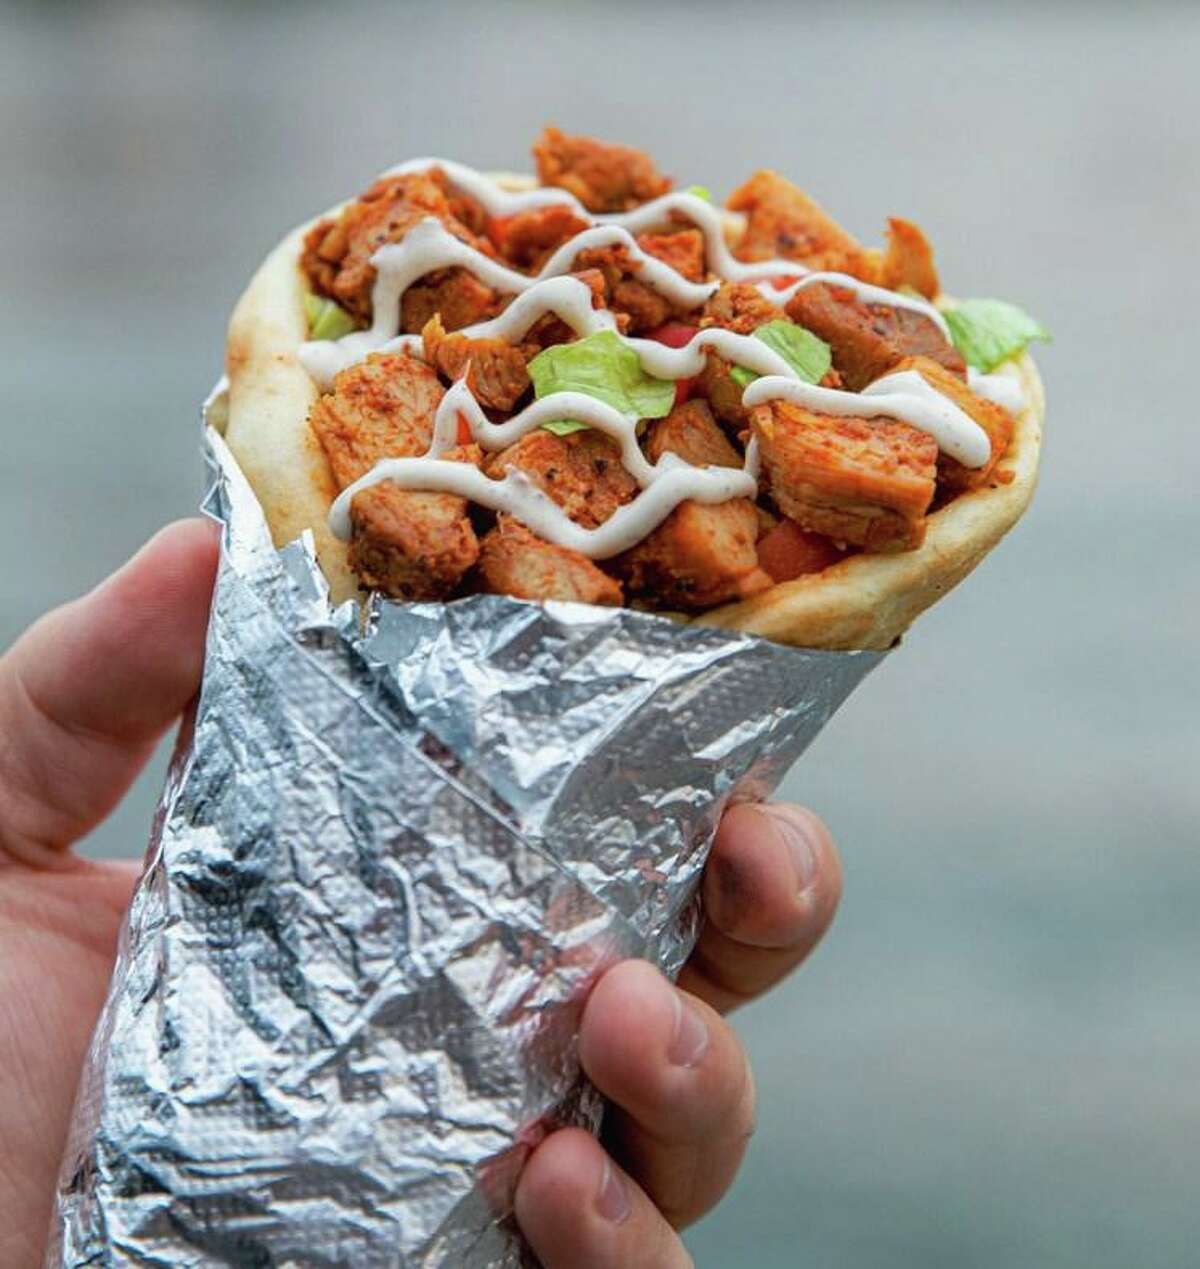 The Halal Guys chain started with vending carts on the streets of Manhattan before expanding into a worldwide chain. The fast casual restaurant serves fresh Mediterranean/American Halal food. The Pearland location opened in late November.